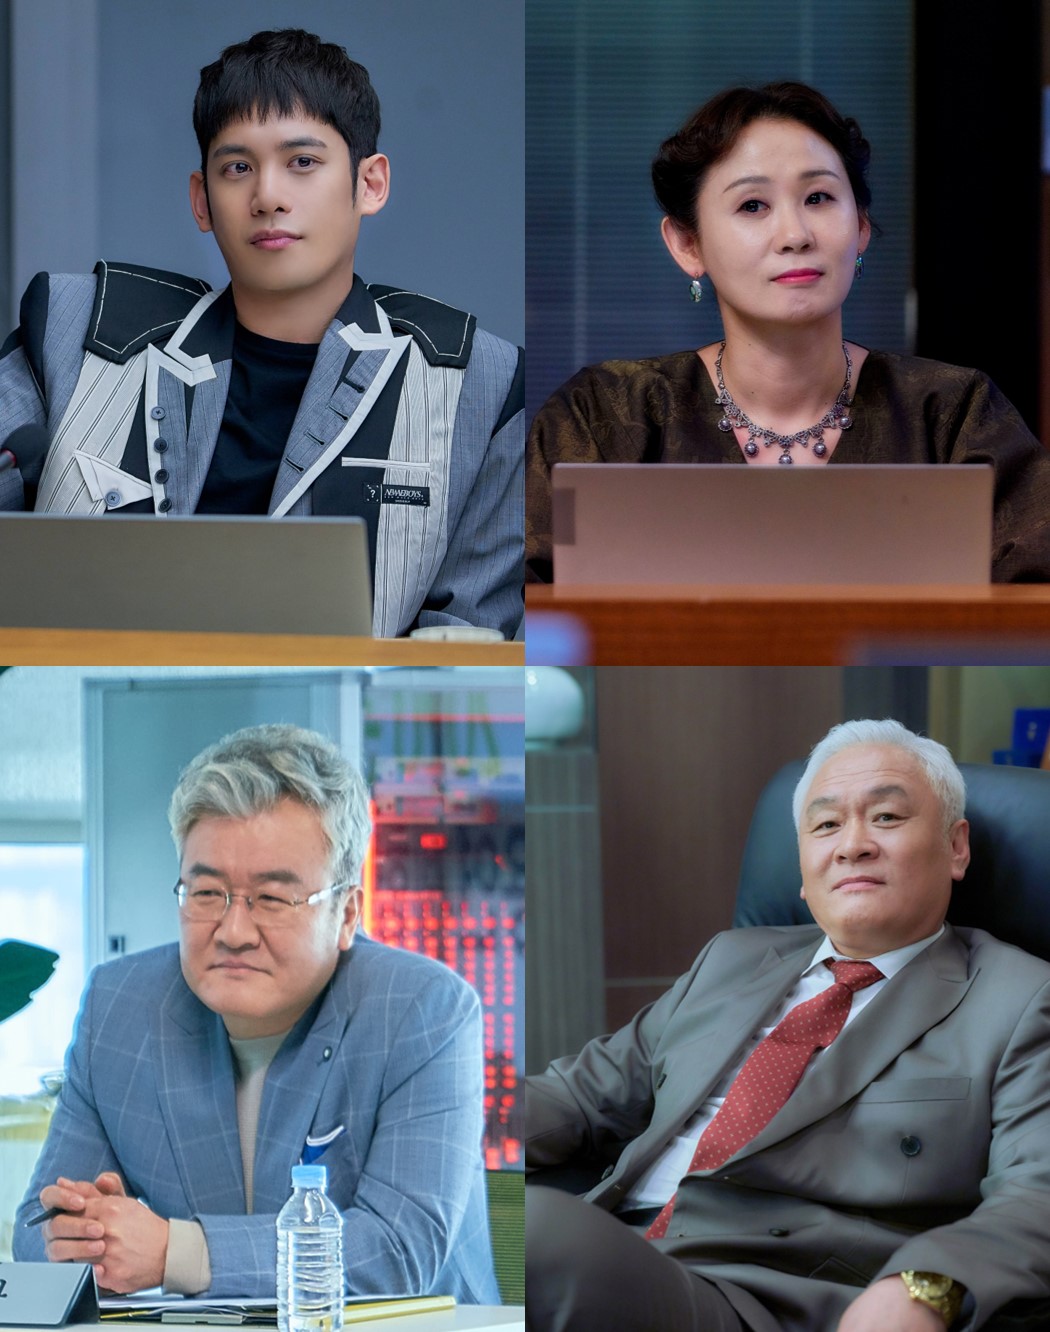 MBCs new tree mini series Lame Internet has released the core figures of the food, Park Ki-woong, Kim Sun-young, Son Jong Hak and the determined criminal.The drama Lame Internet, which is about to be broadcasted on the 20th of next month, is an office comedy that depicts the change of the mans exciting pack, which is the worst of the worst loan manager.I will meet with Park Ki-woong, Kim Sun-young, Son Jong-hak, and Character of the determined criminal who have a unique scale of compliance food for grasping the core personnel in the company that can be said to be the basis of work life.Park Ki-woong, the CEO of the food company, is the son of Nam Gung-pyo, chairman of the observance group, and has a weak power compared to his status and position as the second president of the chaebol.Therefore, he is aware of the best ace manager of the food compliance, Han Chan (Park Hae Jin), and is a gold spoon office billon that sets up a confrontation angle.Actor Kim Sun-young, who believes in acting, starts with the accounting of the ramen factory and plays the only female executive in the current food.I feel the timing and fear when he tries to jump over him as a true in-house political master who completely hides himself.Expectations are high for Actor Kim Sun-youngs acting transformation, which will showcase professional female executive character.Ahn Sang-jong, head of the marketing sales division, who is on the line of the chaebols second-generation CEO Nam-gung Junsu and is an icon of over-loyalty, was taken by Actor Son Jong-hak.Realizing that he was lagging behind in the power struggle, he will play a decisive role in promoting the senior internship of his long-time friend and uncle Man-sik (Kim Eung-soo) with the help of President Nam Gung-jun-su.Actor-deceased criminal, which boasts intense charisma, plays the chairman of the super-compliant food group, the general manager of the compliance group, Namgung Pyo.Ramen is a father of ramen who has achieved the success story of the Korean business world. He is a natural businessman and marketing genius who is good at human politics and strong in terms of improvisation and crisis.However, as I get older, I will become a more and more father-in-law, and sometimes I will break the mentality of my employees and add tension to the drama.iMBC Cha Hye-mi  Photos